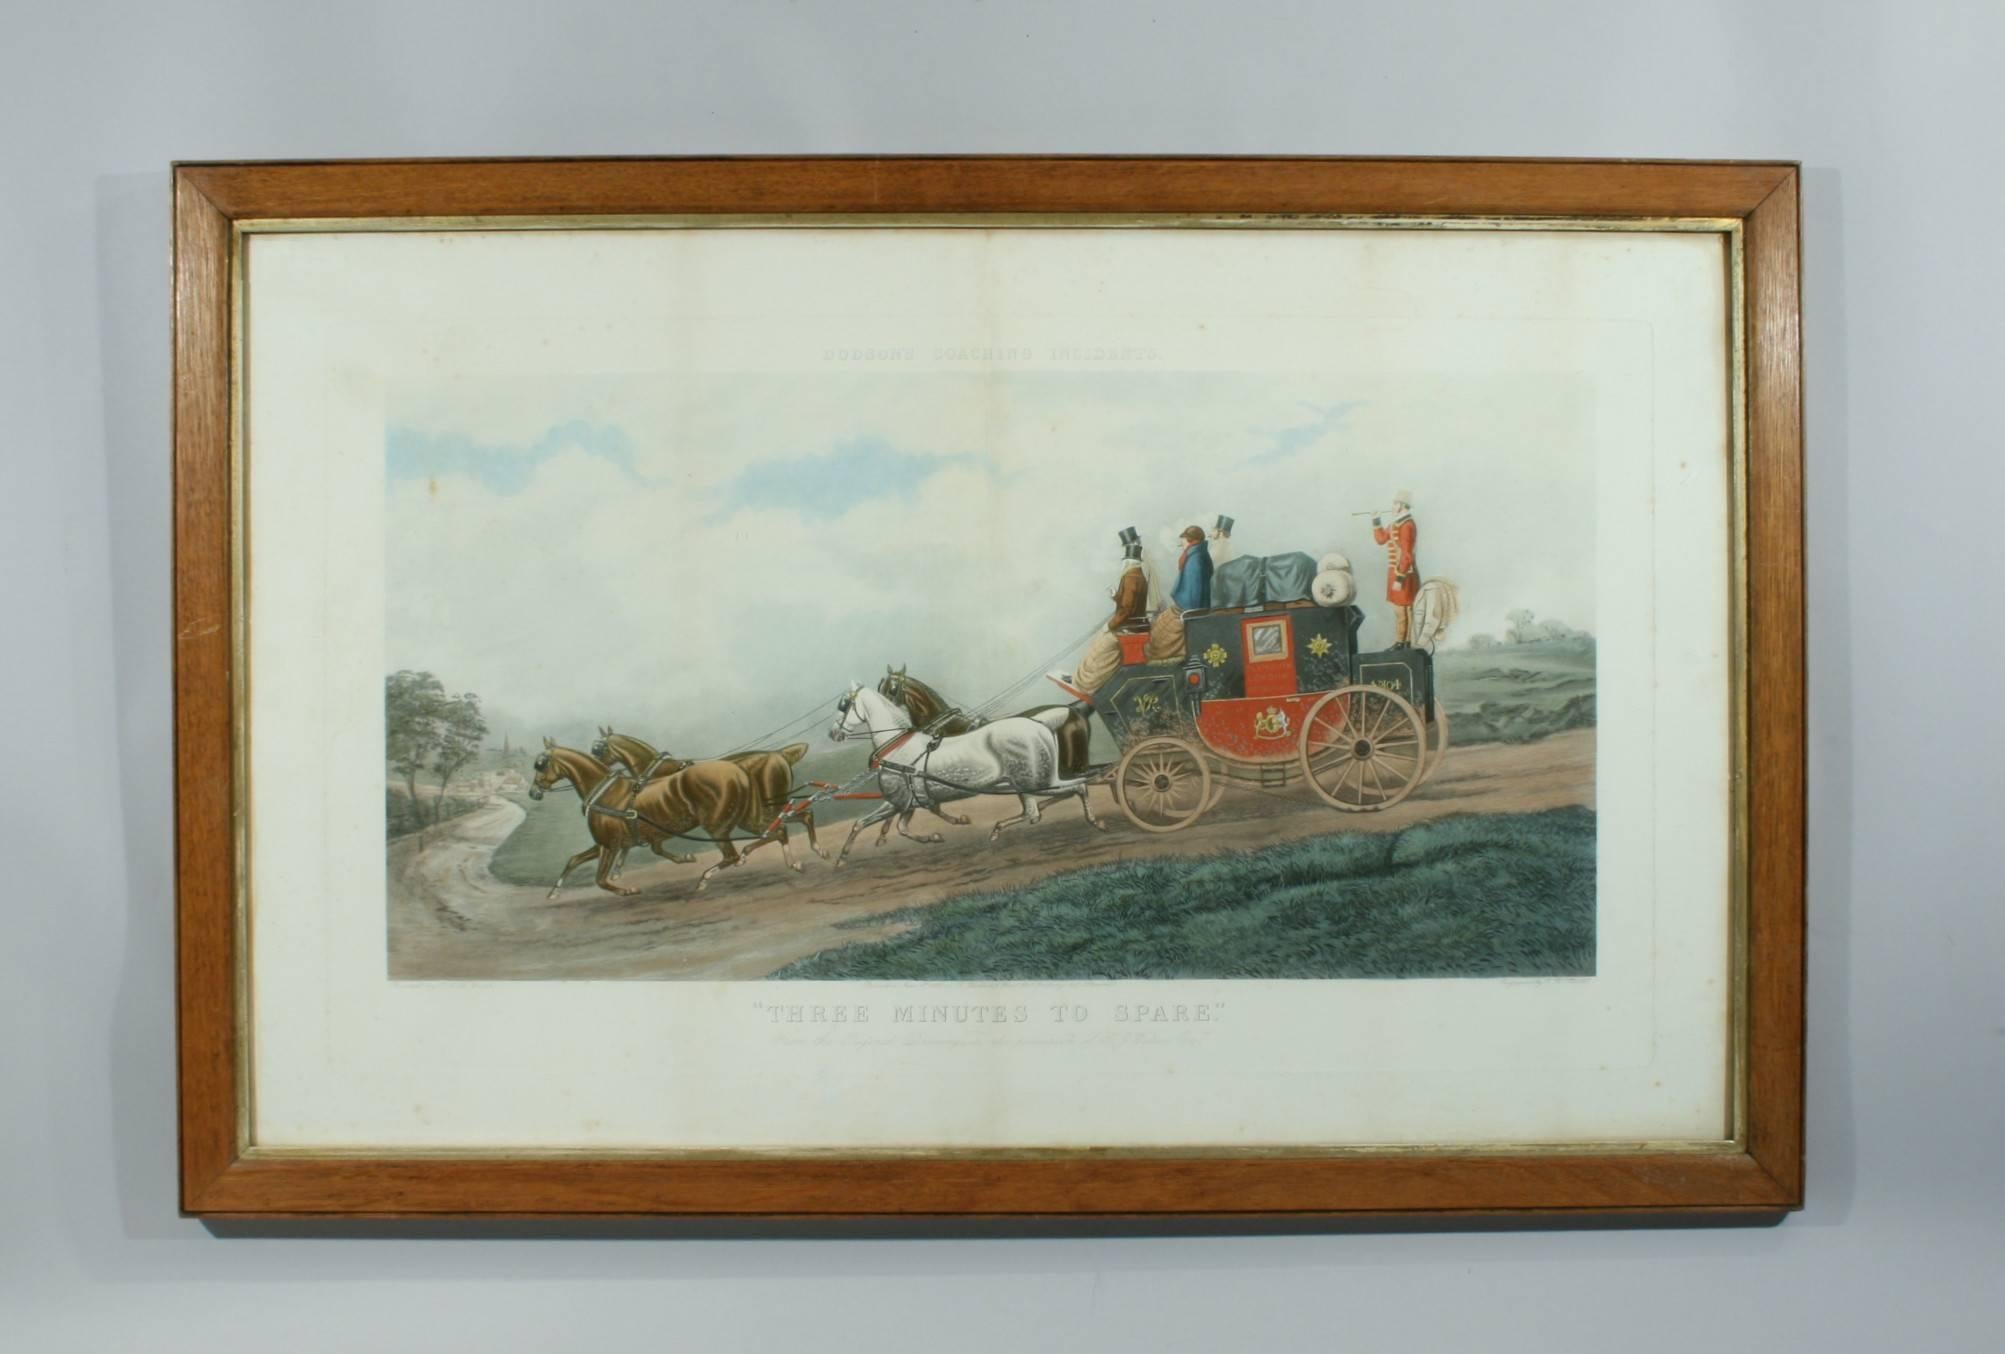 Antique Coaching Print 'Three Minutes to Spare', T. N. H. Walsh 1